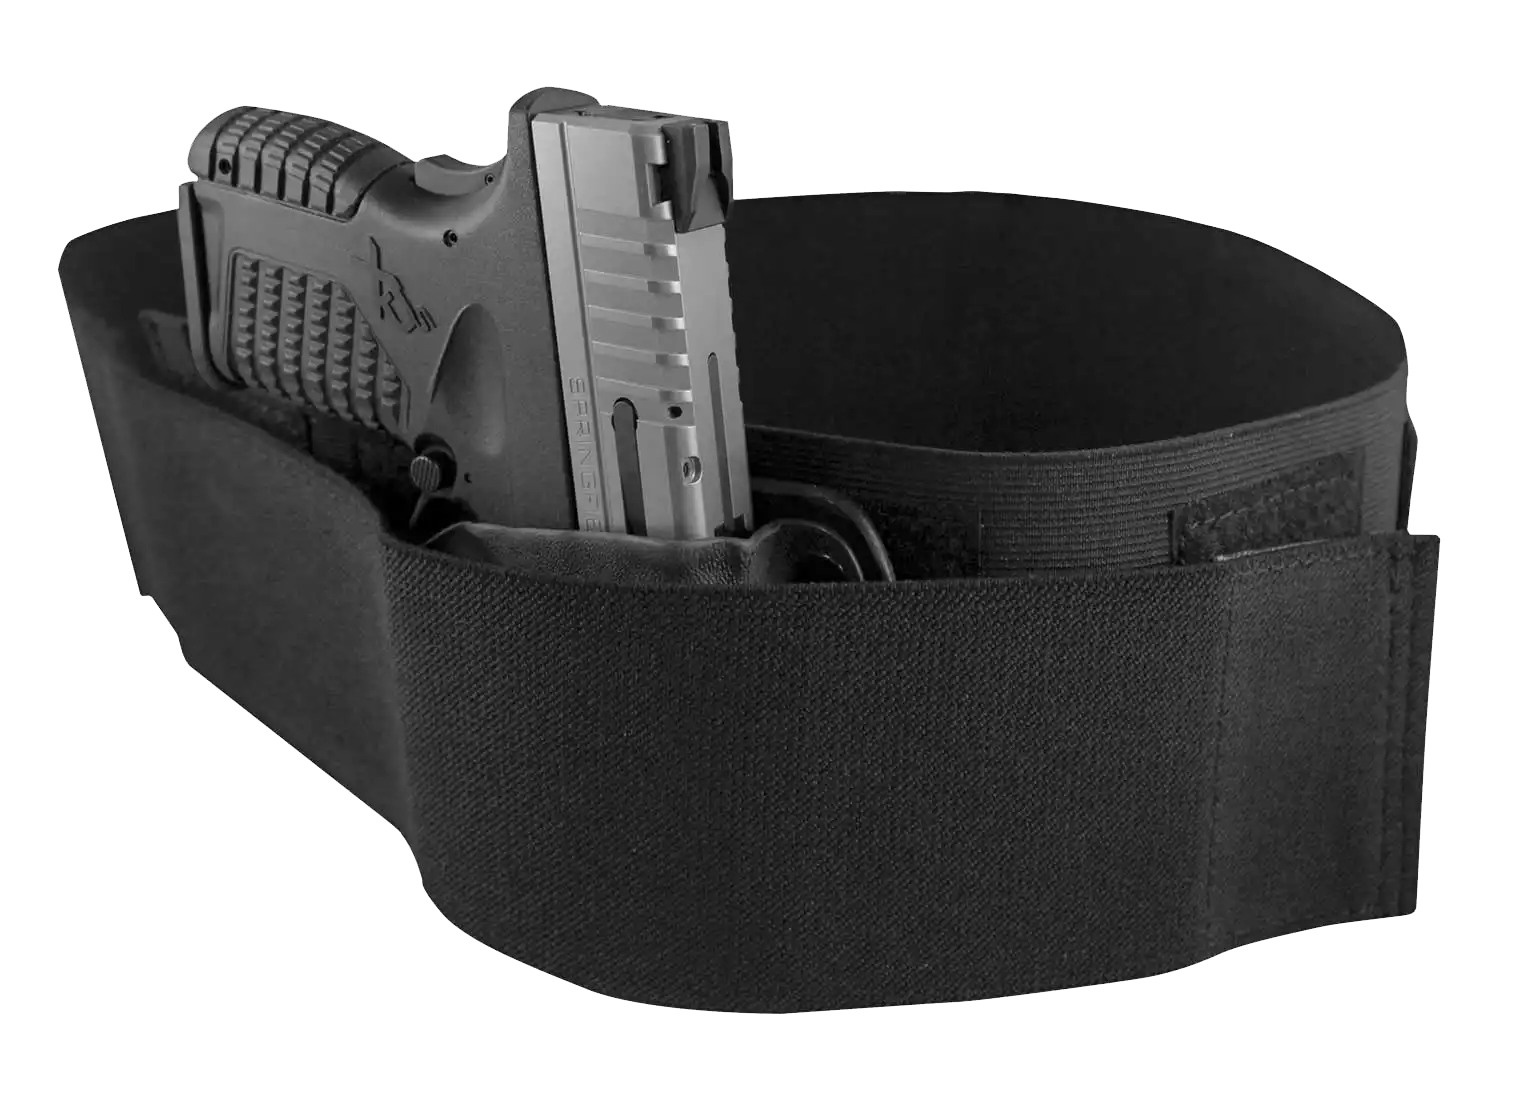 Modular Belly Band with Springfield Armory XDs